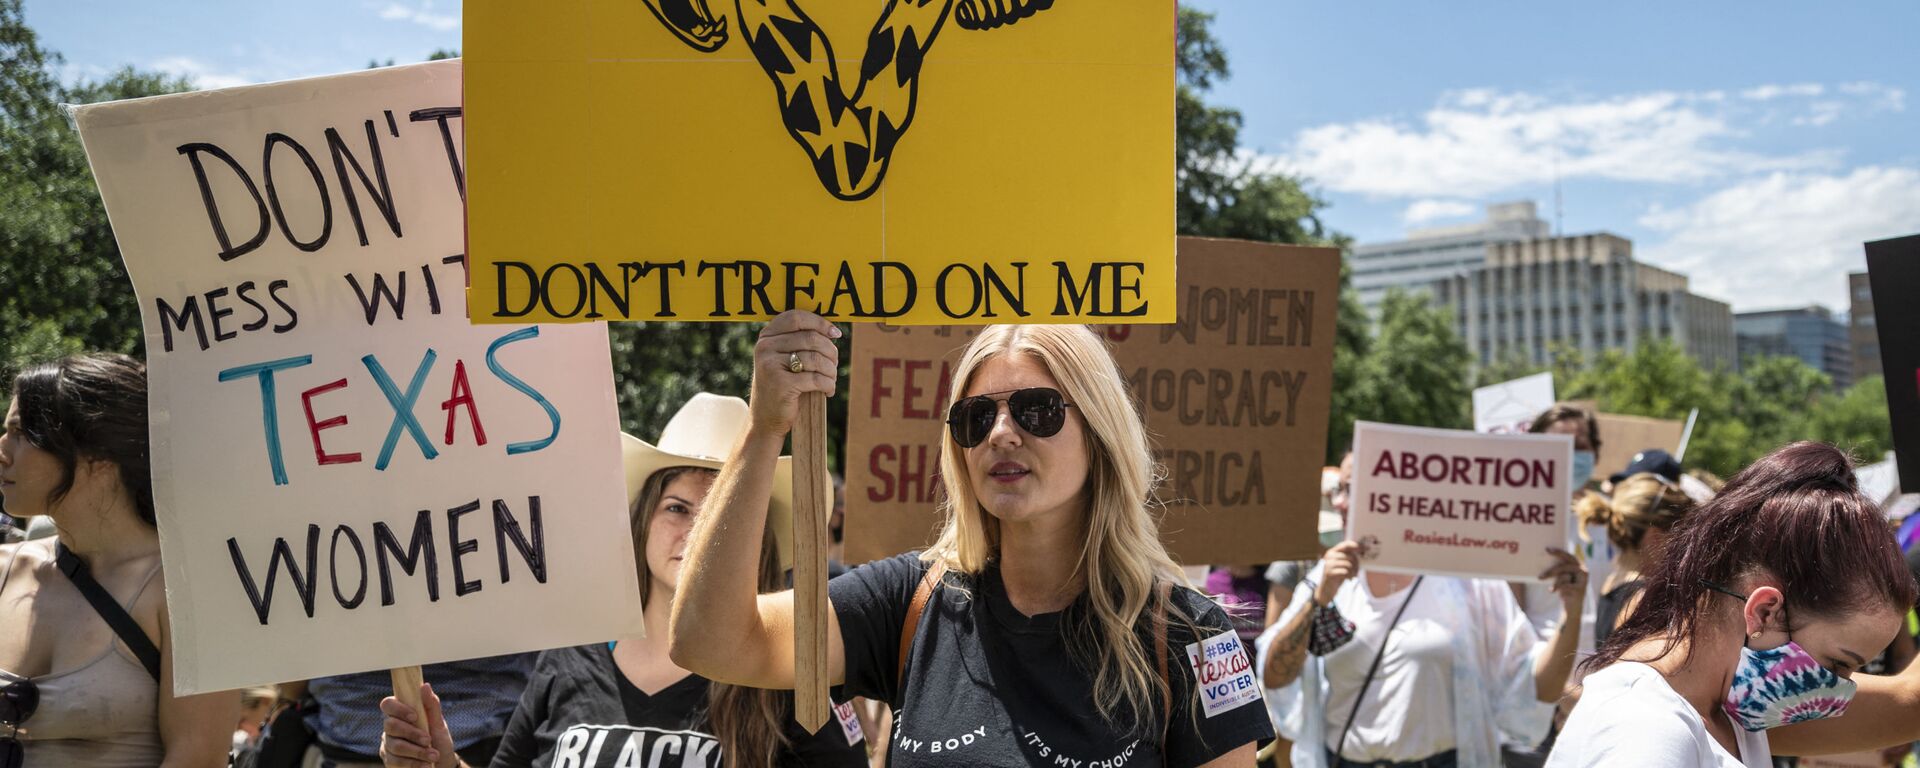 Protesters hold up signs at a protest outside the Texas state capitol on May 29, 2021 in Austin, Texas. - Sputnik International, 1920, 06.09.2021